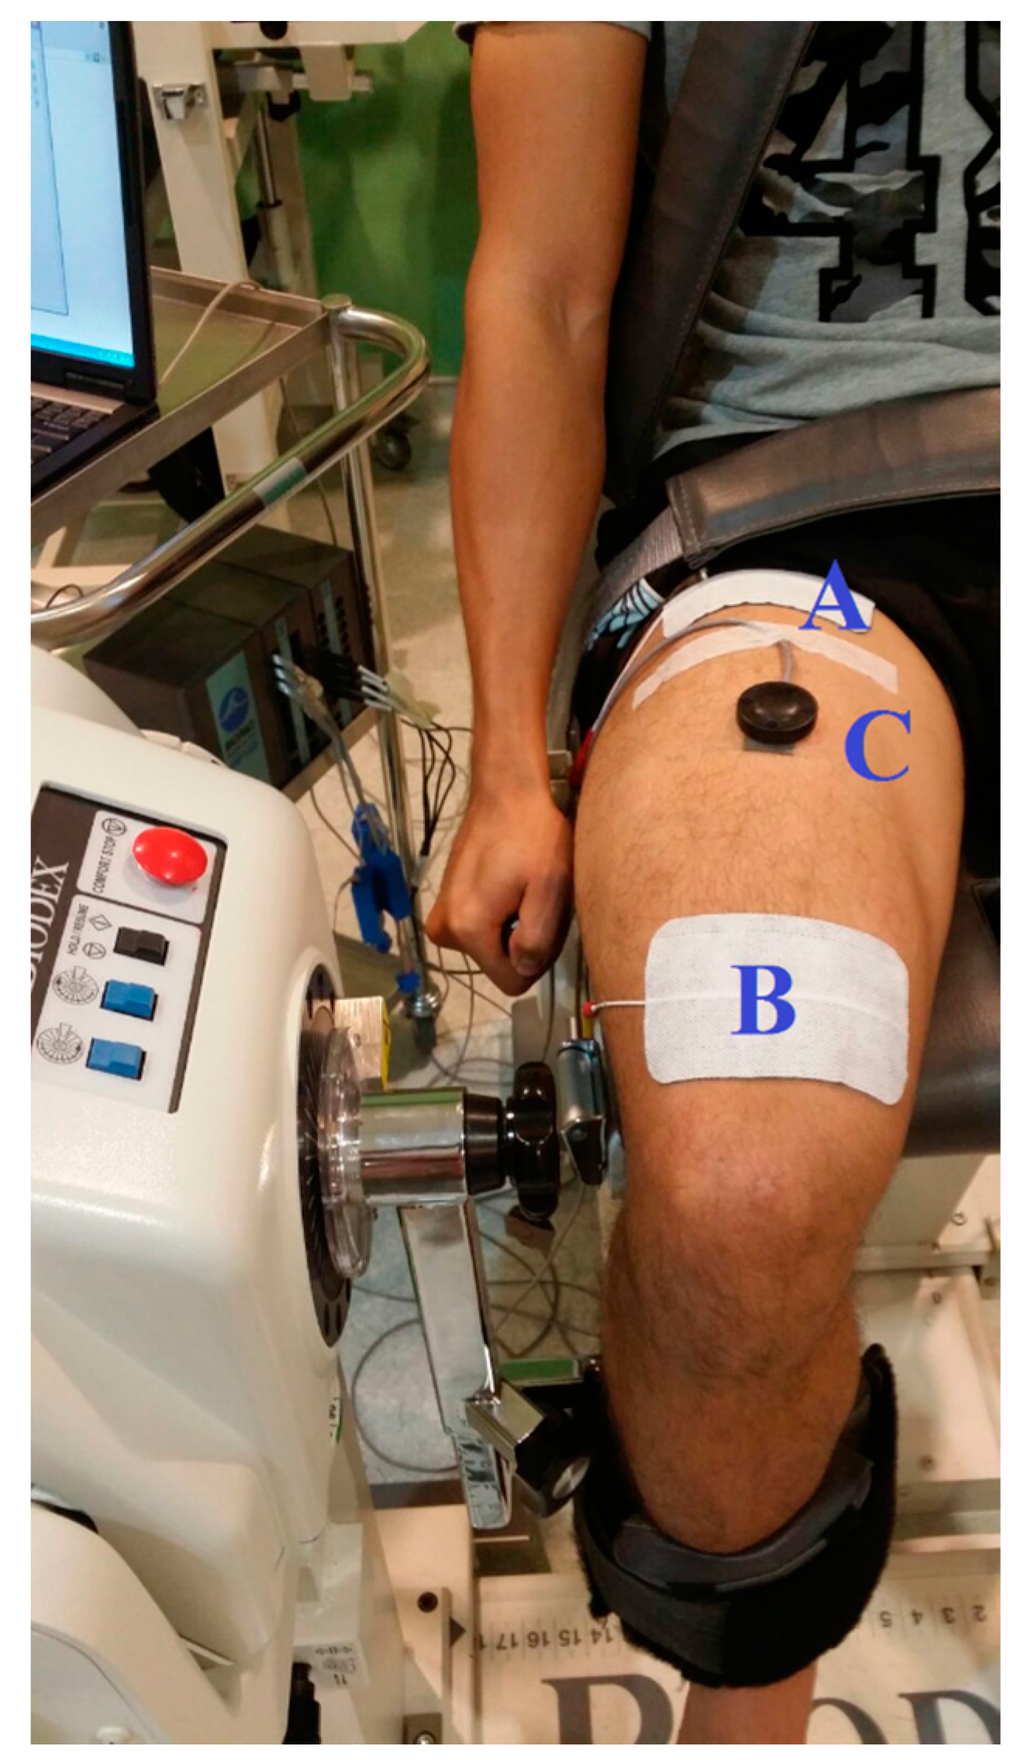 Sensors | Free Full-Text | Estimation of Electrically-Evoked Knee Torque  from Mechanomyography Using Support Vector Regression